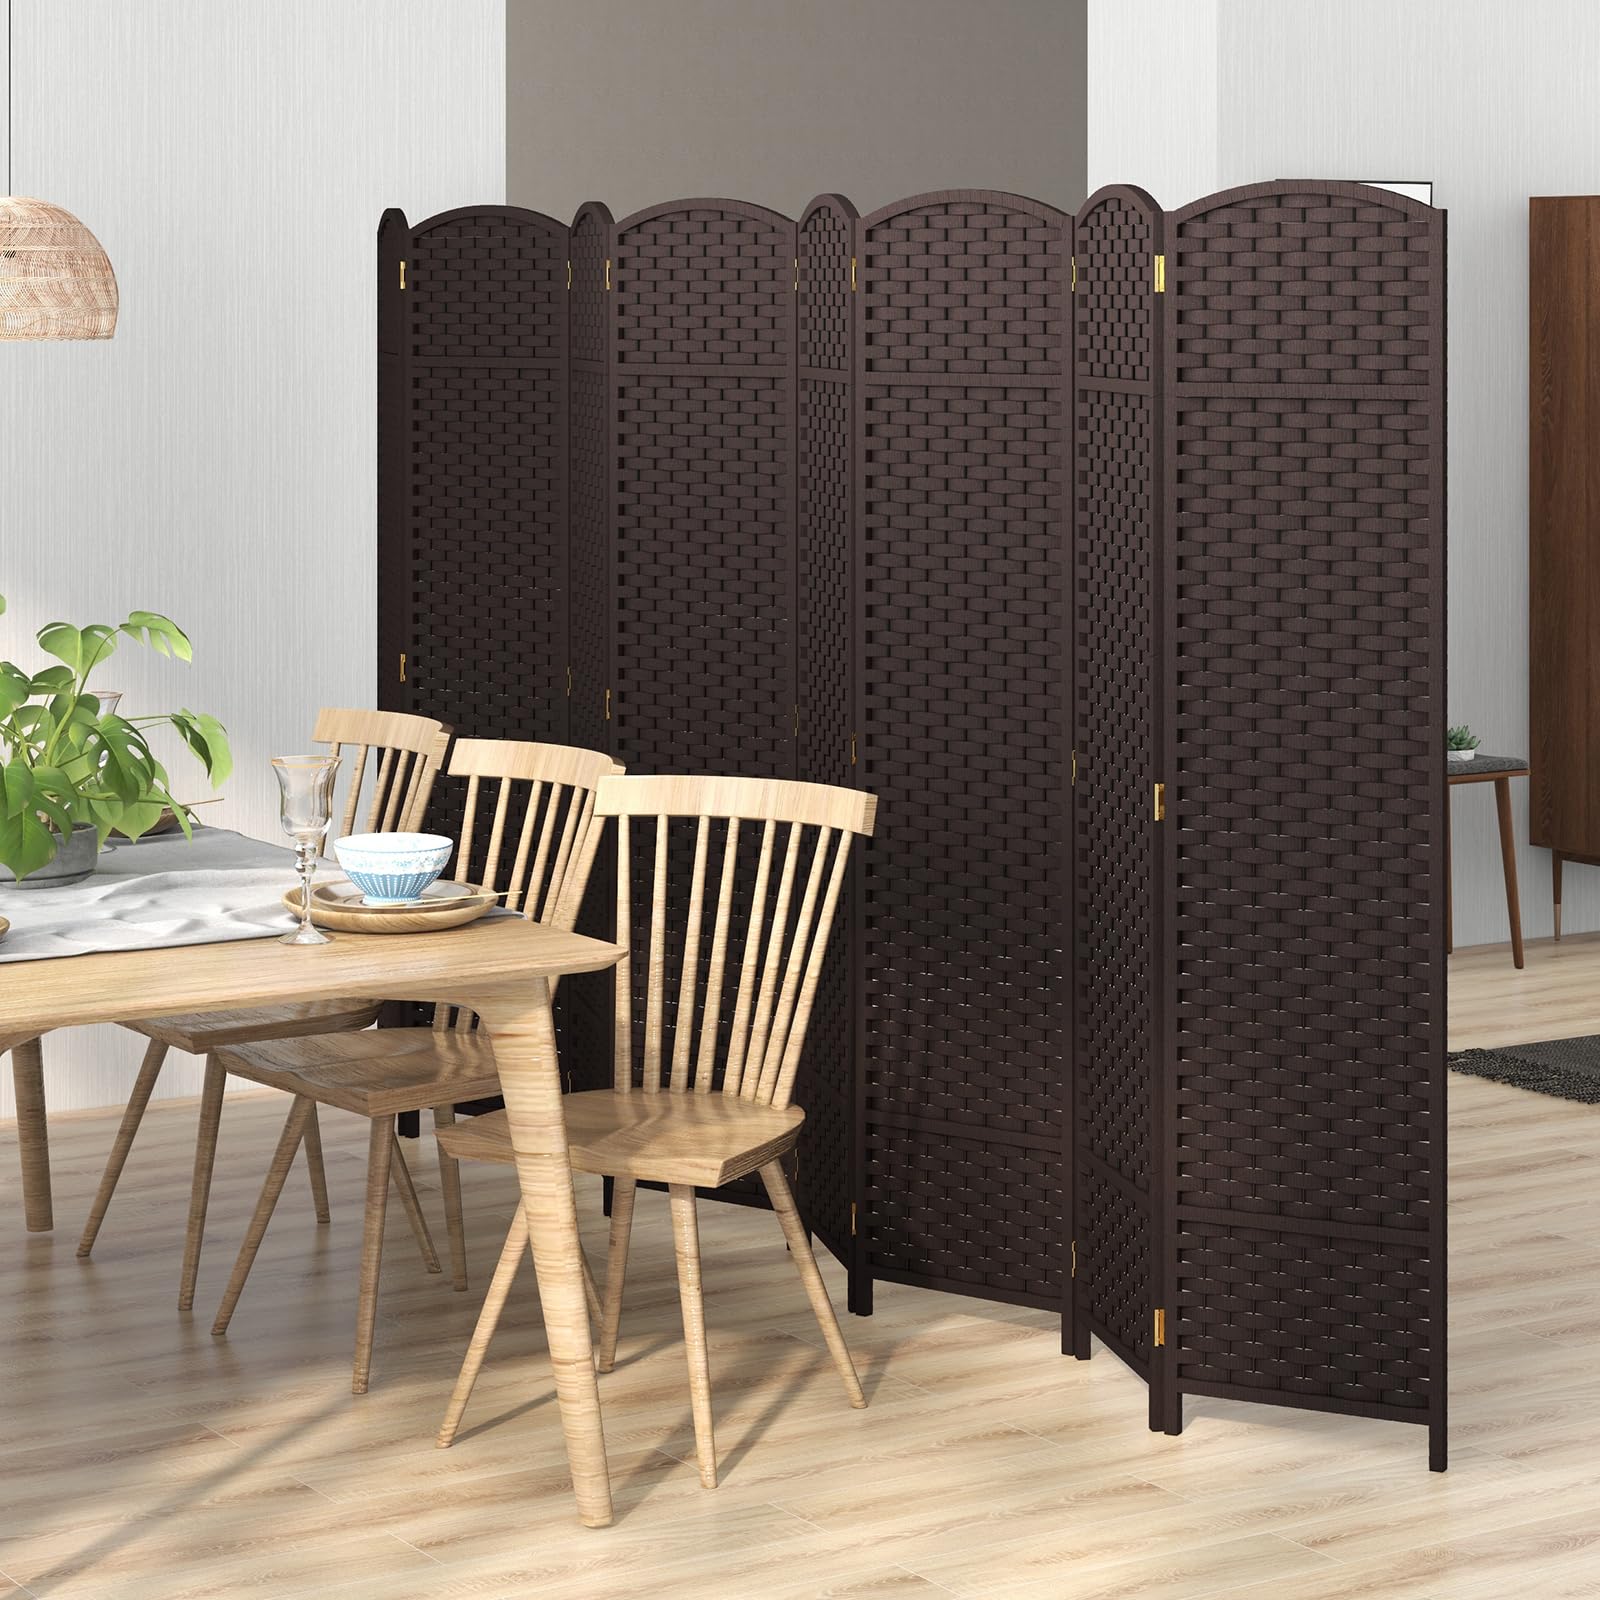 Giantex Room Divider 8 Panel, 5.6ft Folding Privacy Screen